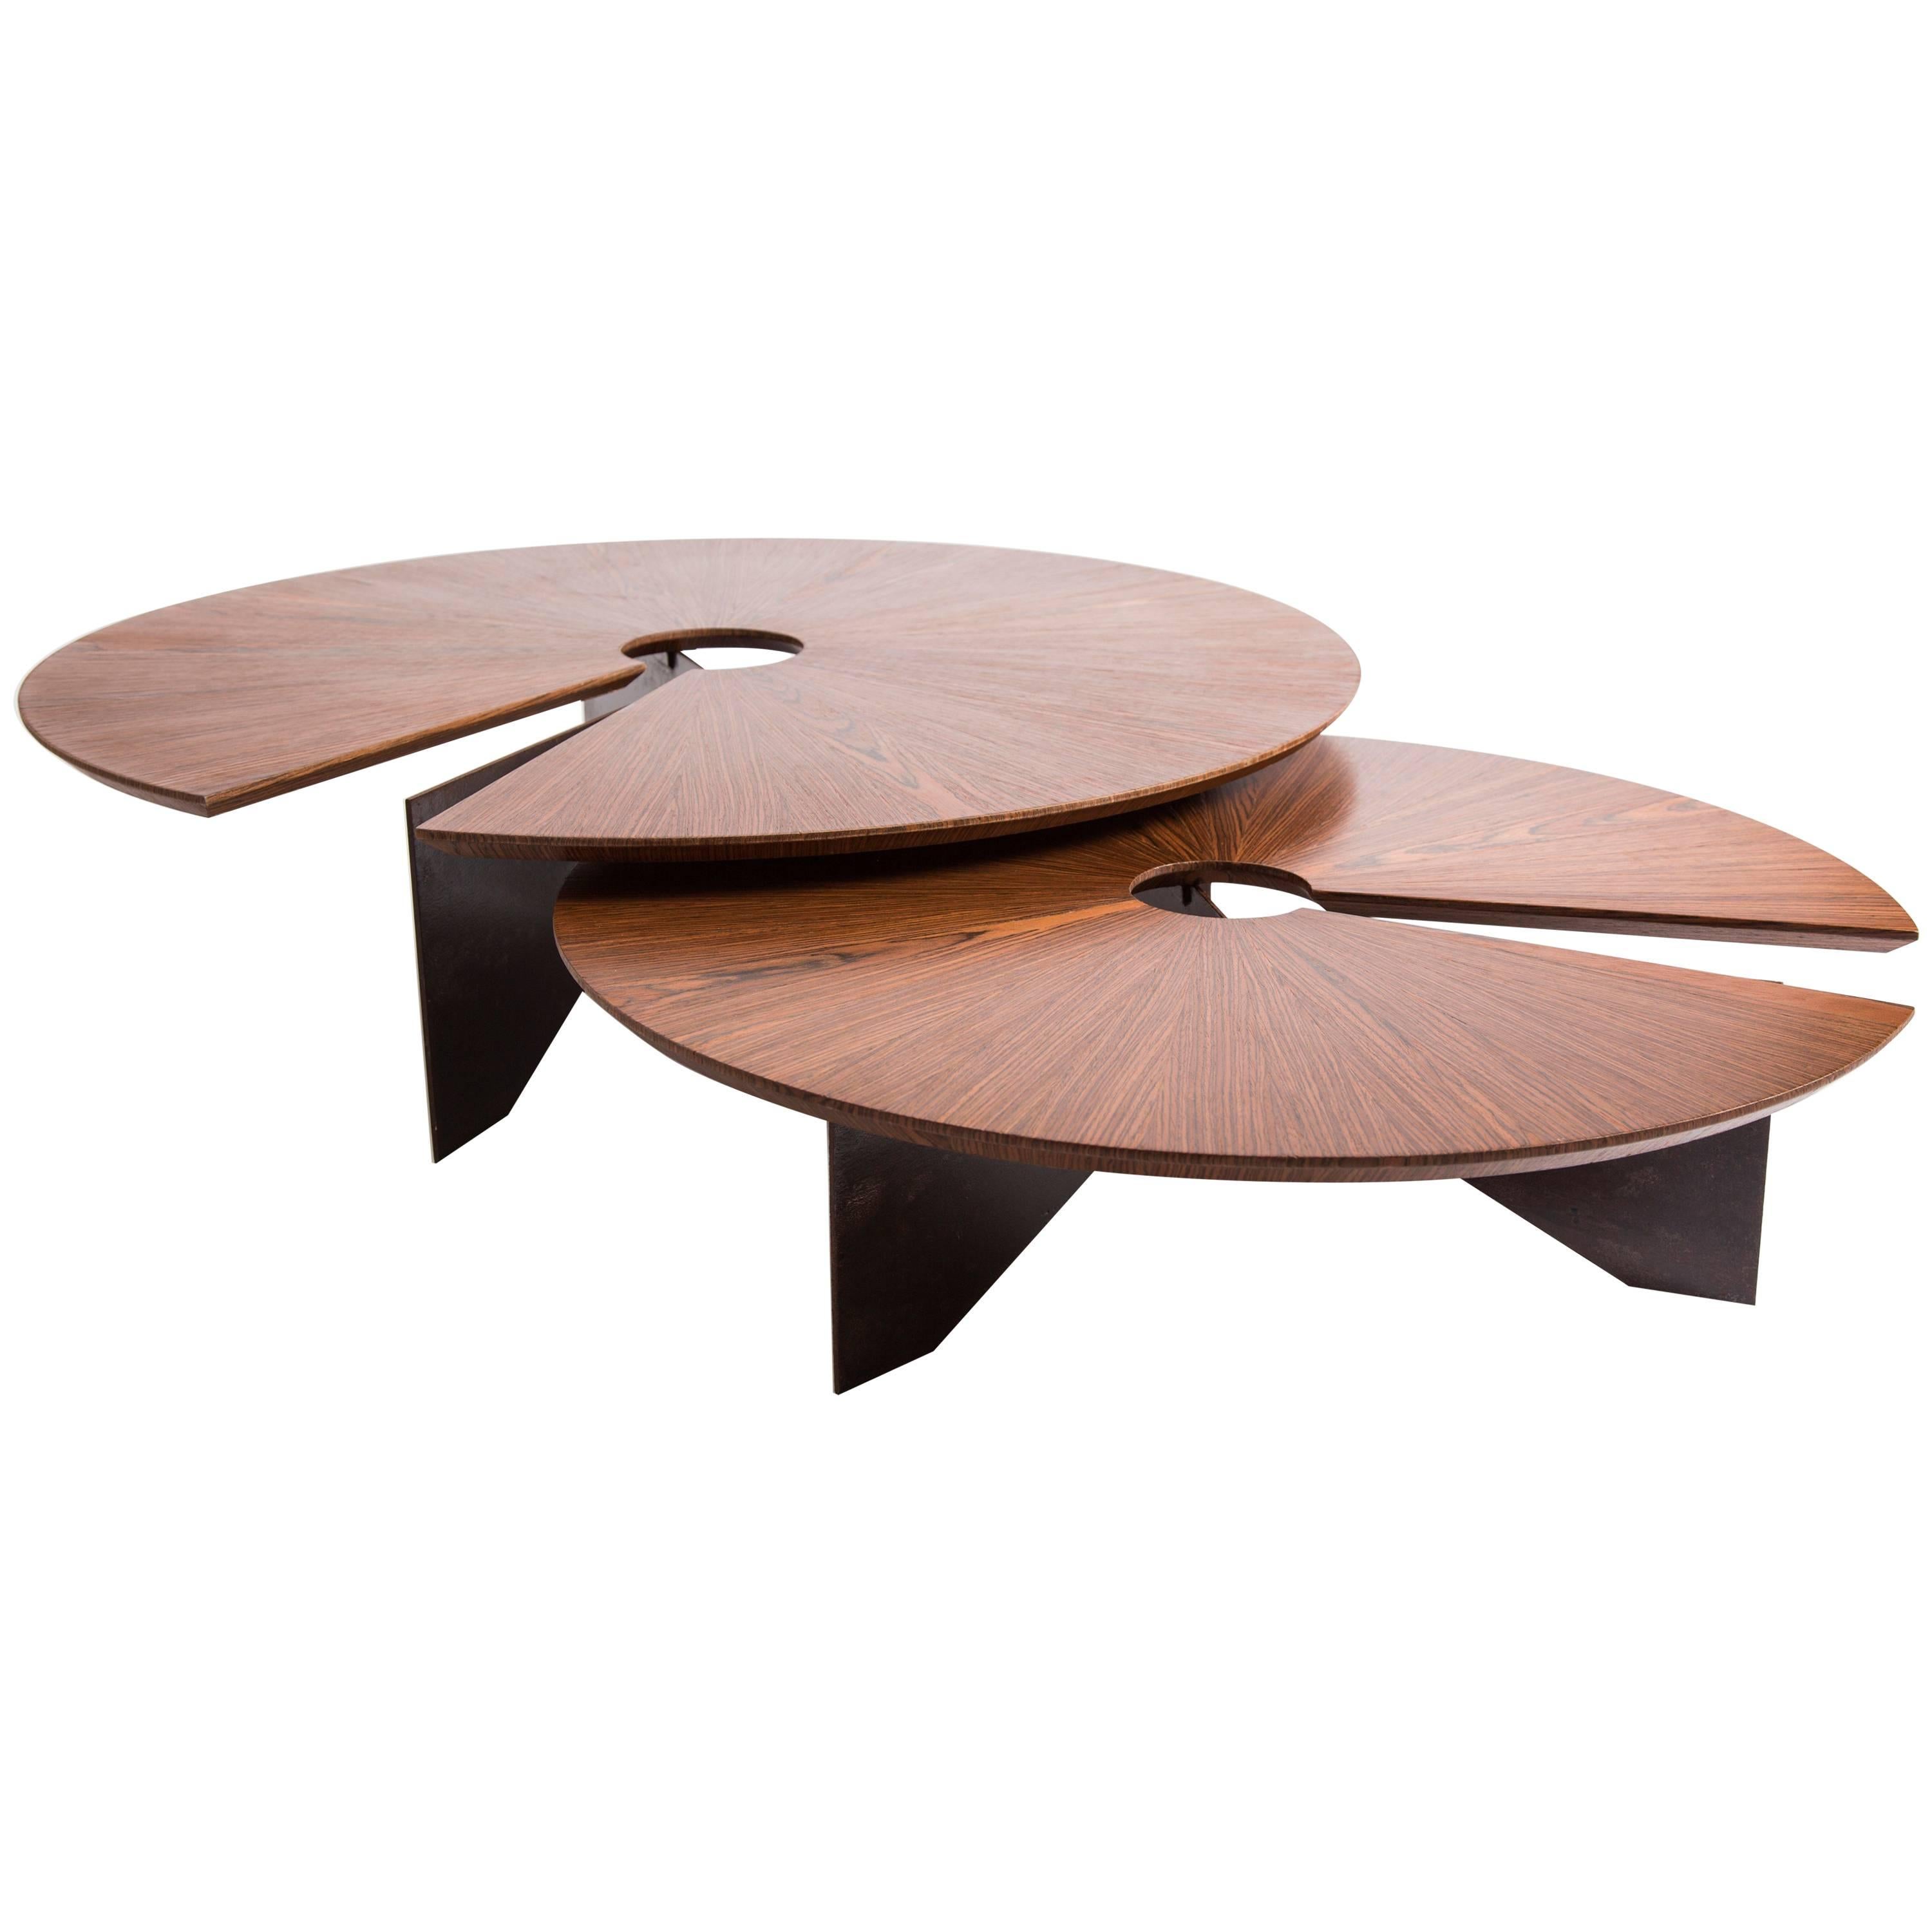 Lena Coffee Table, Size Medium, Minimalist and Modern Style For Sale